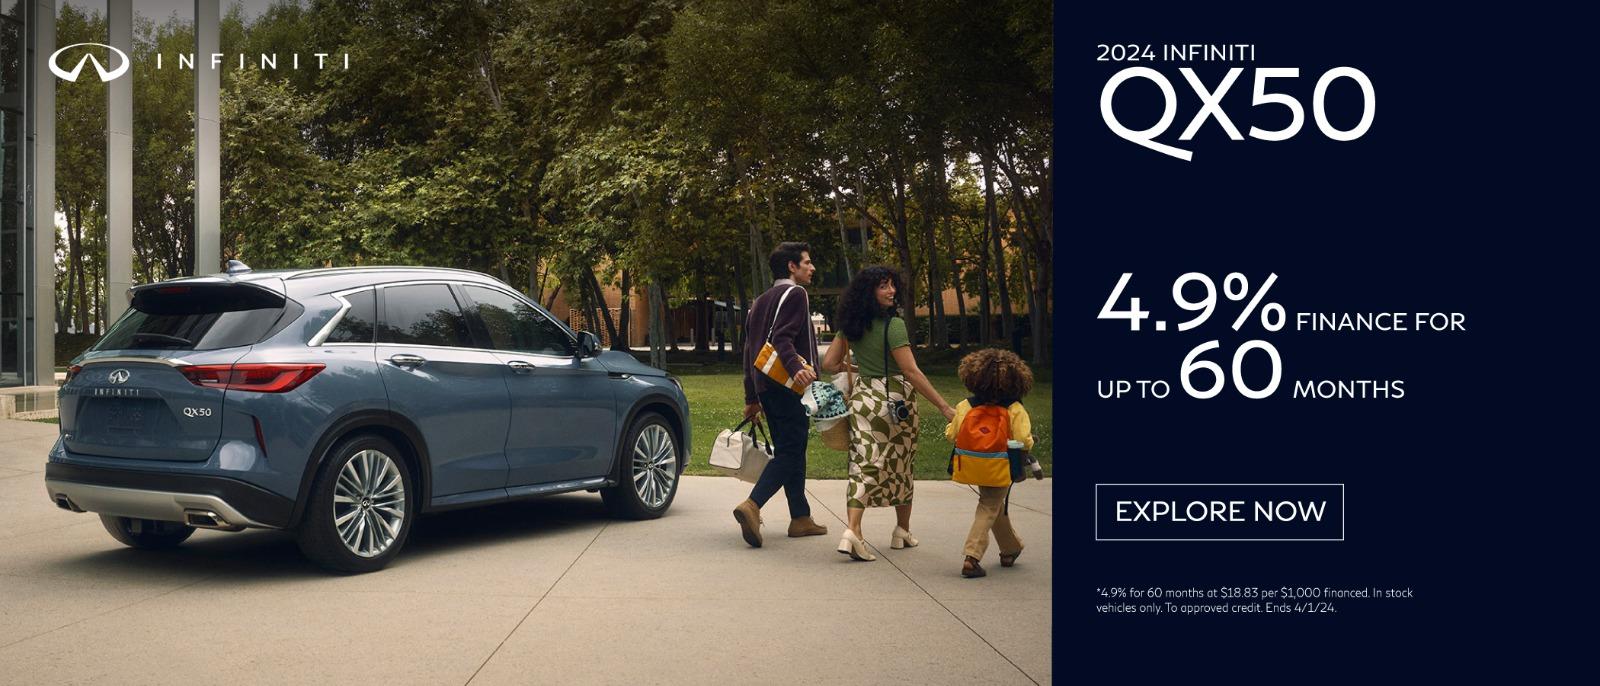 2023 INFINITI QX50 4.9%Fince for up to 60 Months